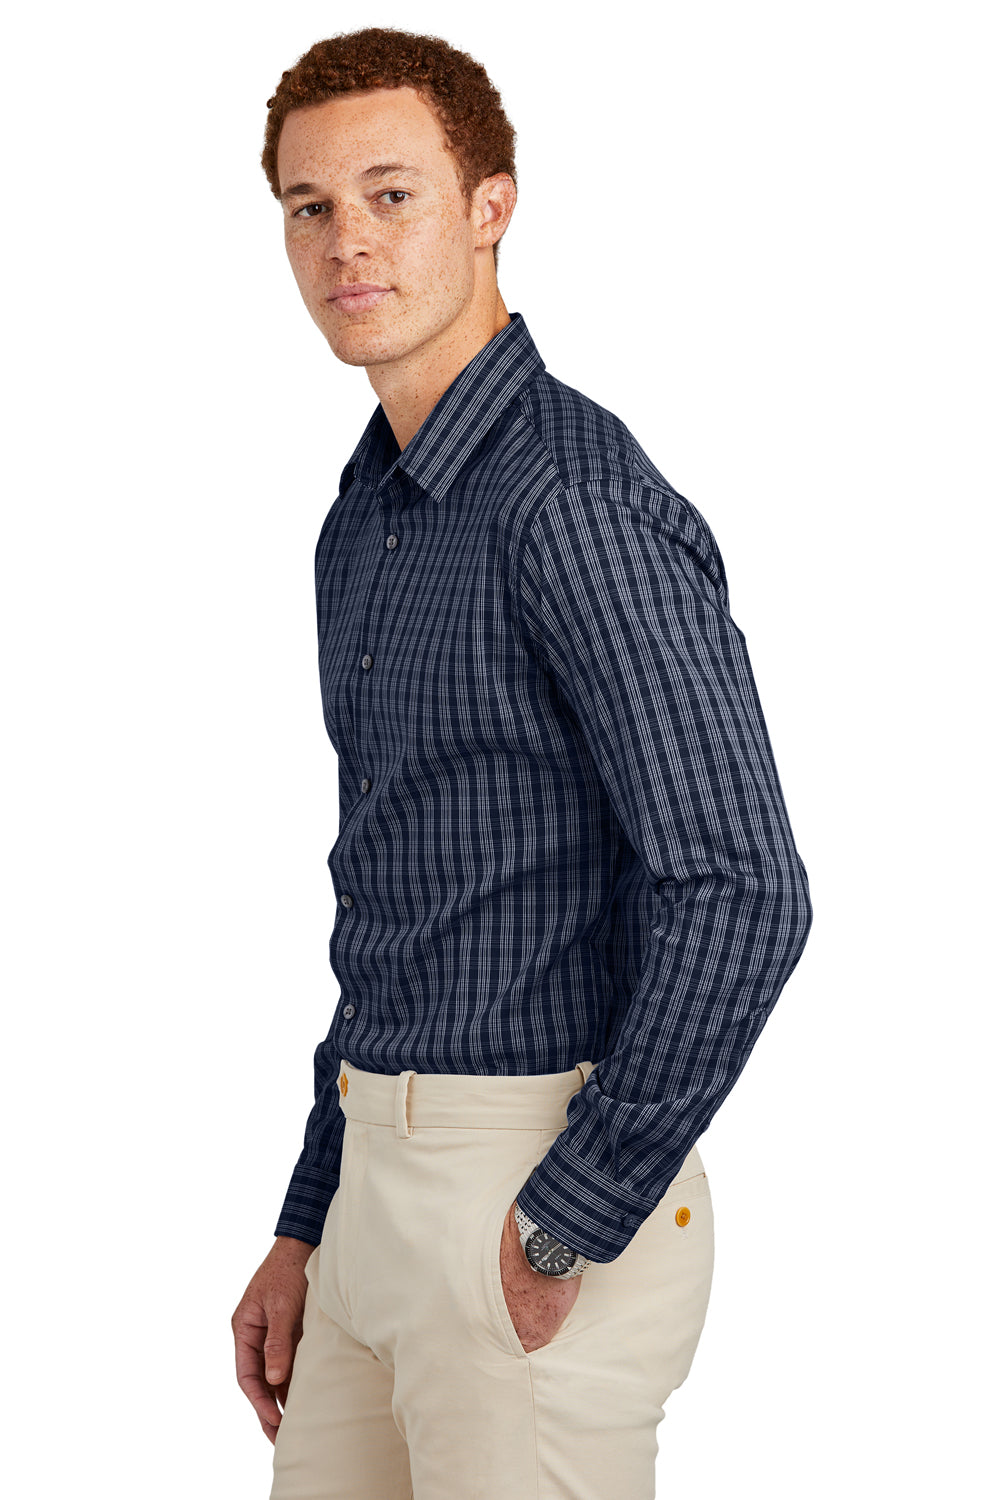 Brooks Brothers Mens Tech Stretch Long Sleeve Button Down Shirt Navy Blue/White Model Side